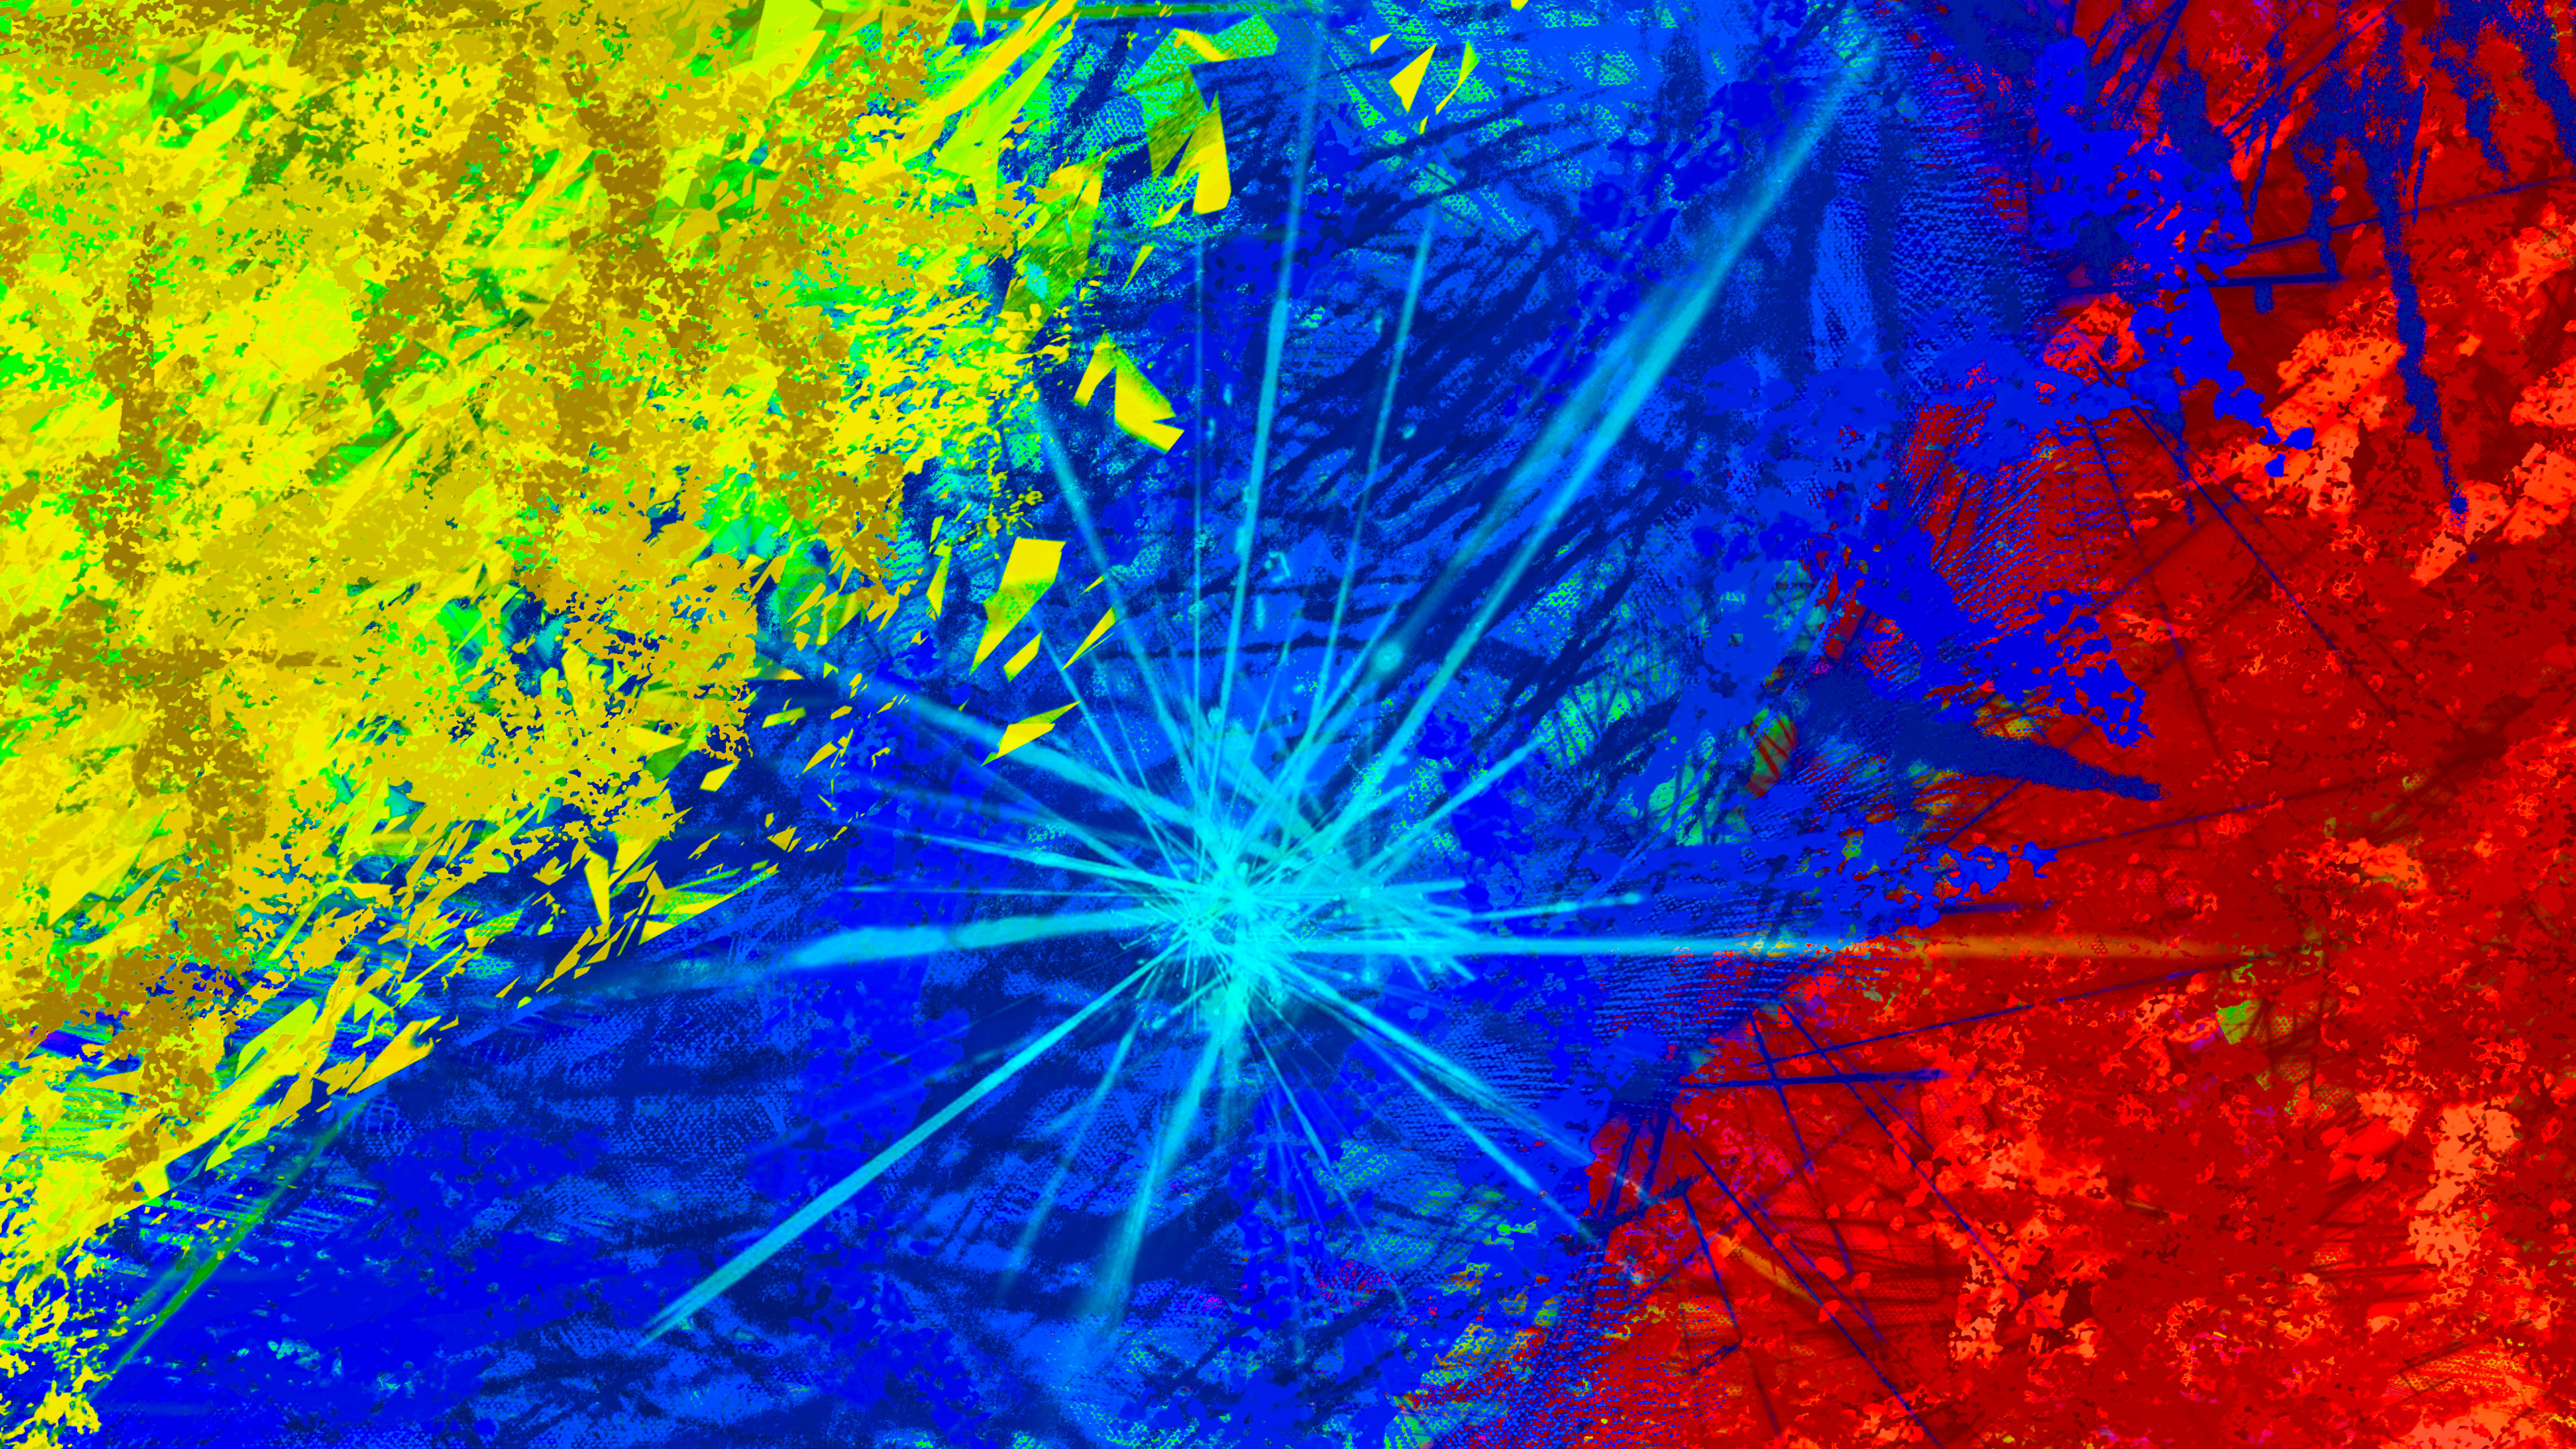 Revitalize your PC with free abstract wallpaper, a fusion of colors and creativity.